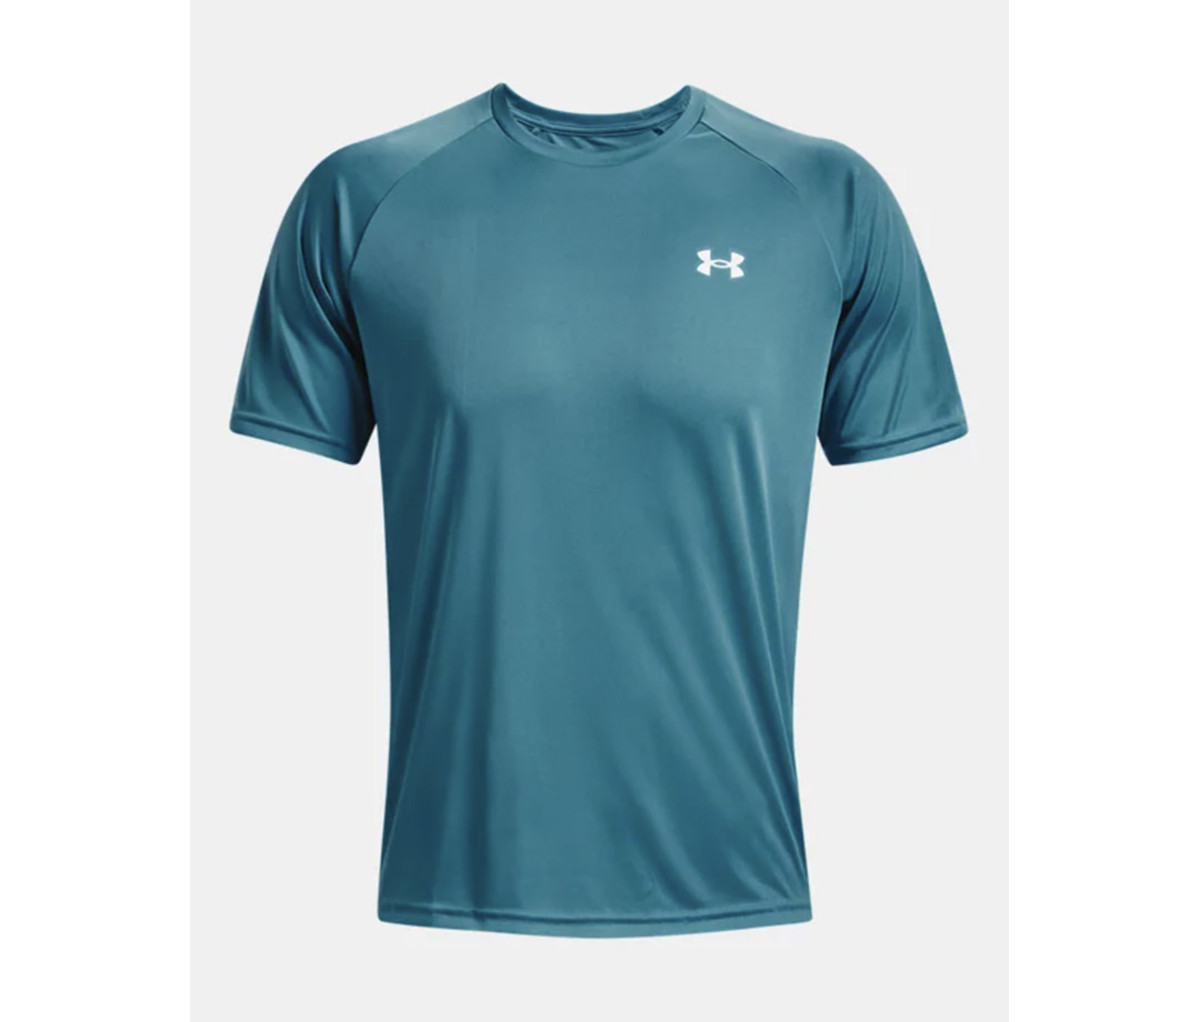 Save Some Extra Money on Great Workout Clothes From Under Armour Today ...